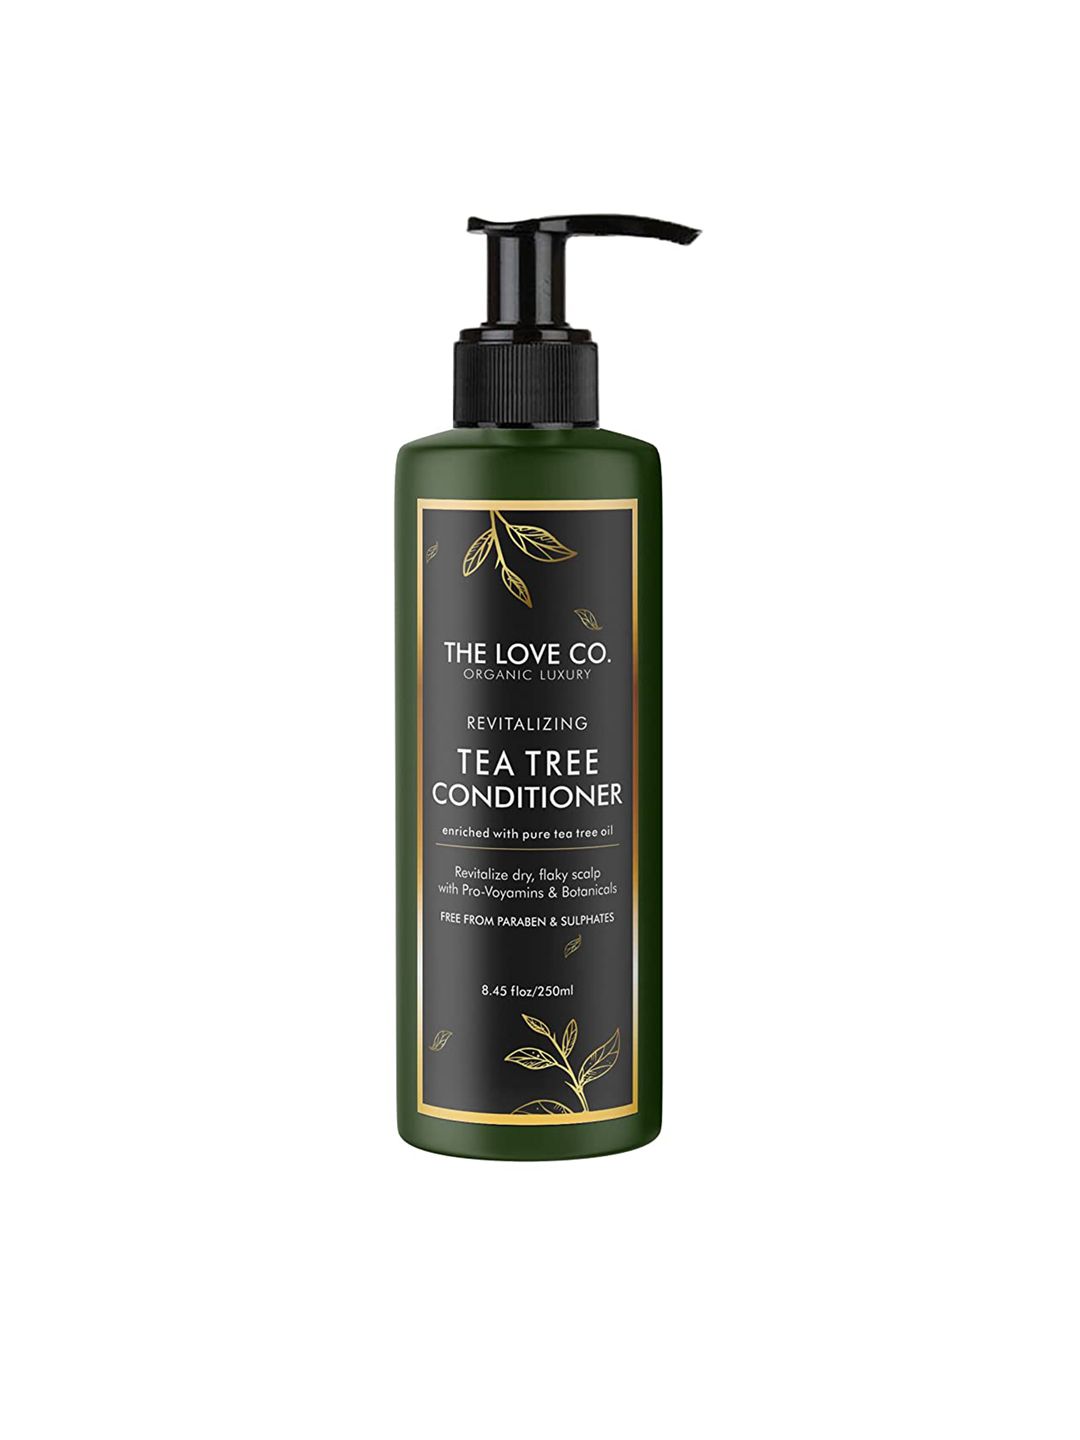 THE LOVE CO. White Tea Tree Conditioner For Hair With Almond oil & Vitamin E Extracts 250ml Price in India